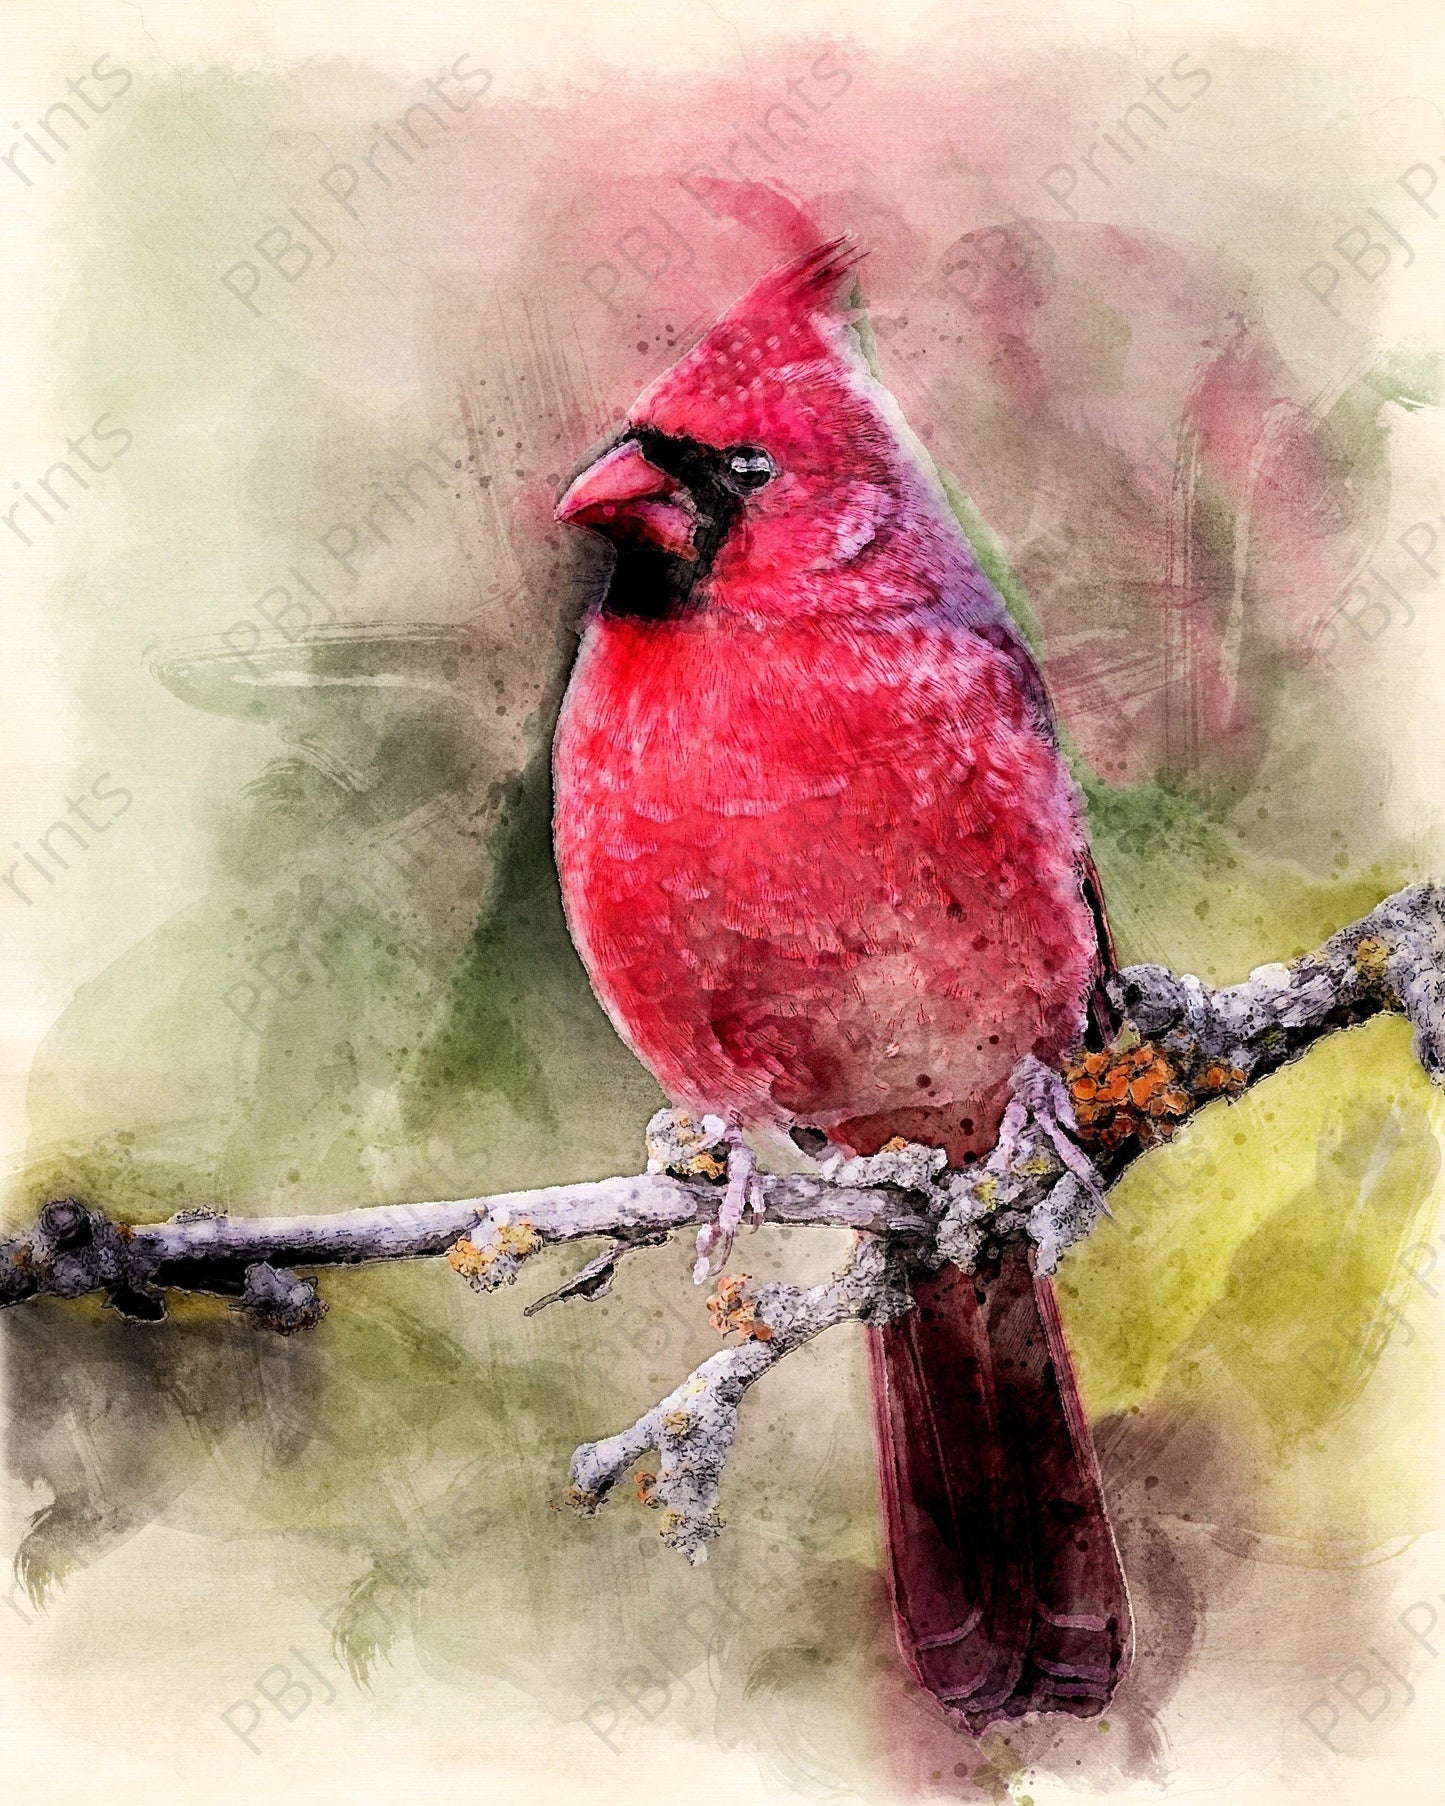 Northern Cardinal Watercolor - Artist by Justin Rice - New Arrivals